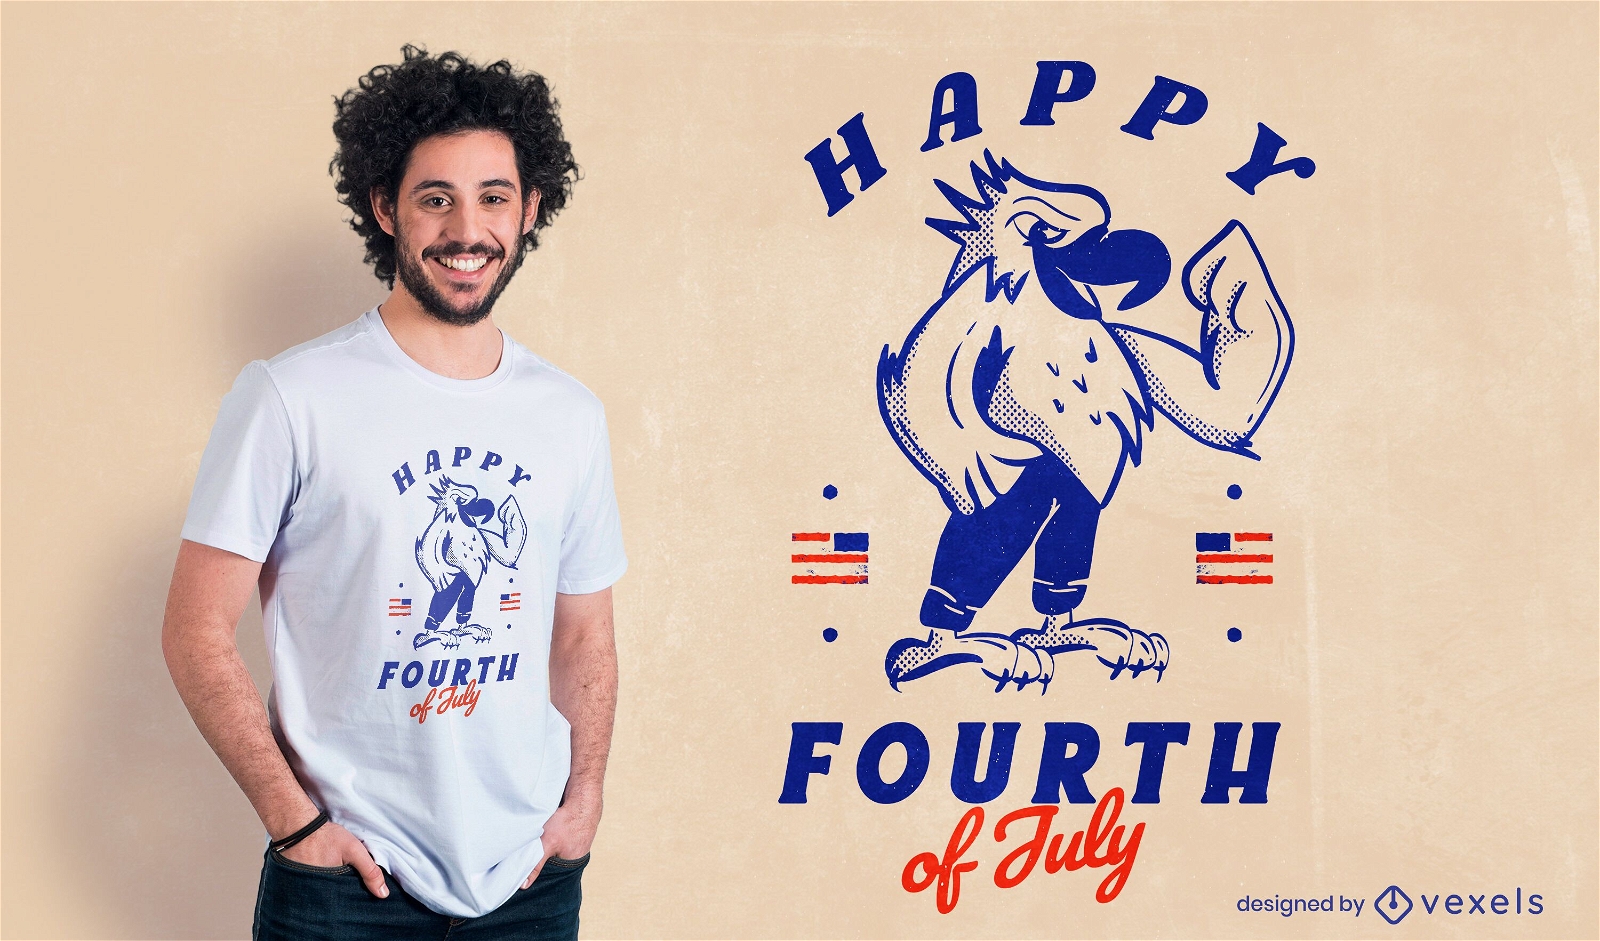 Happy fourth of july t-shirt design